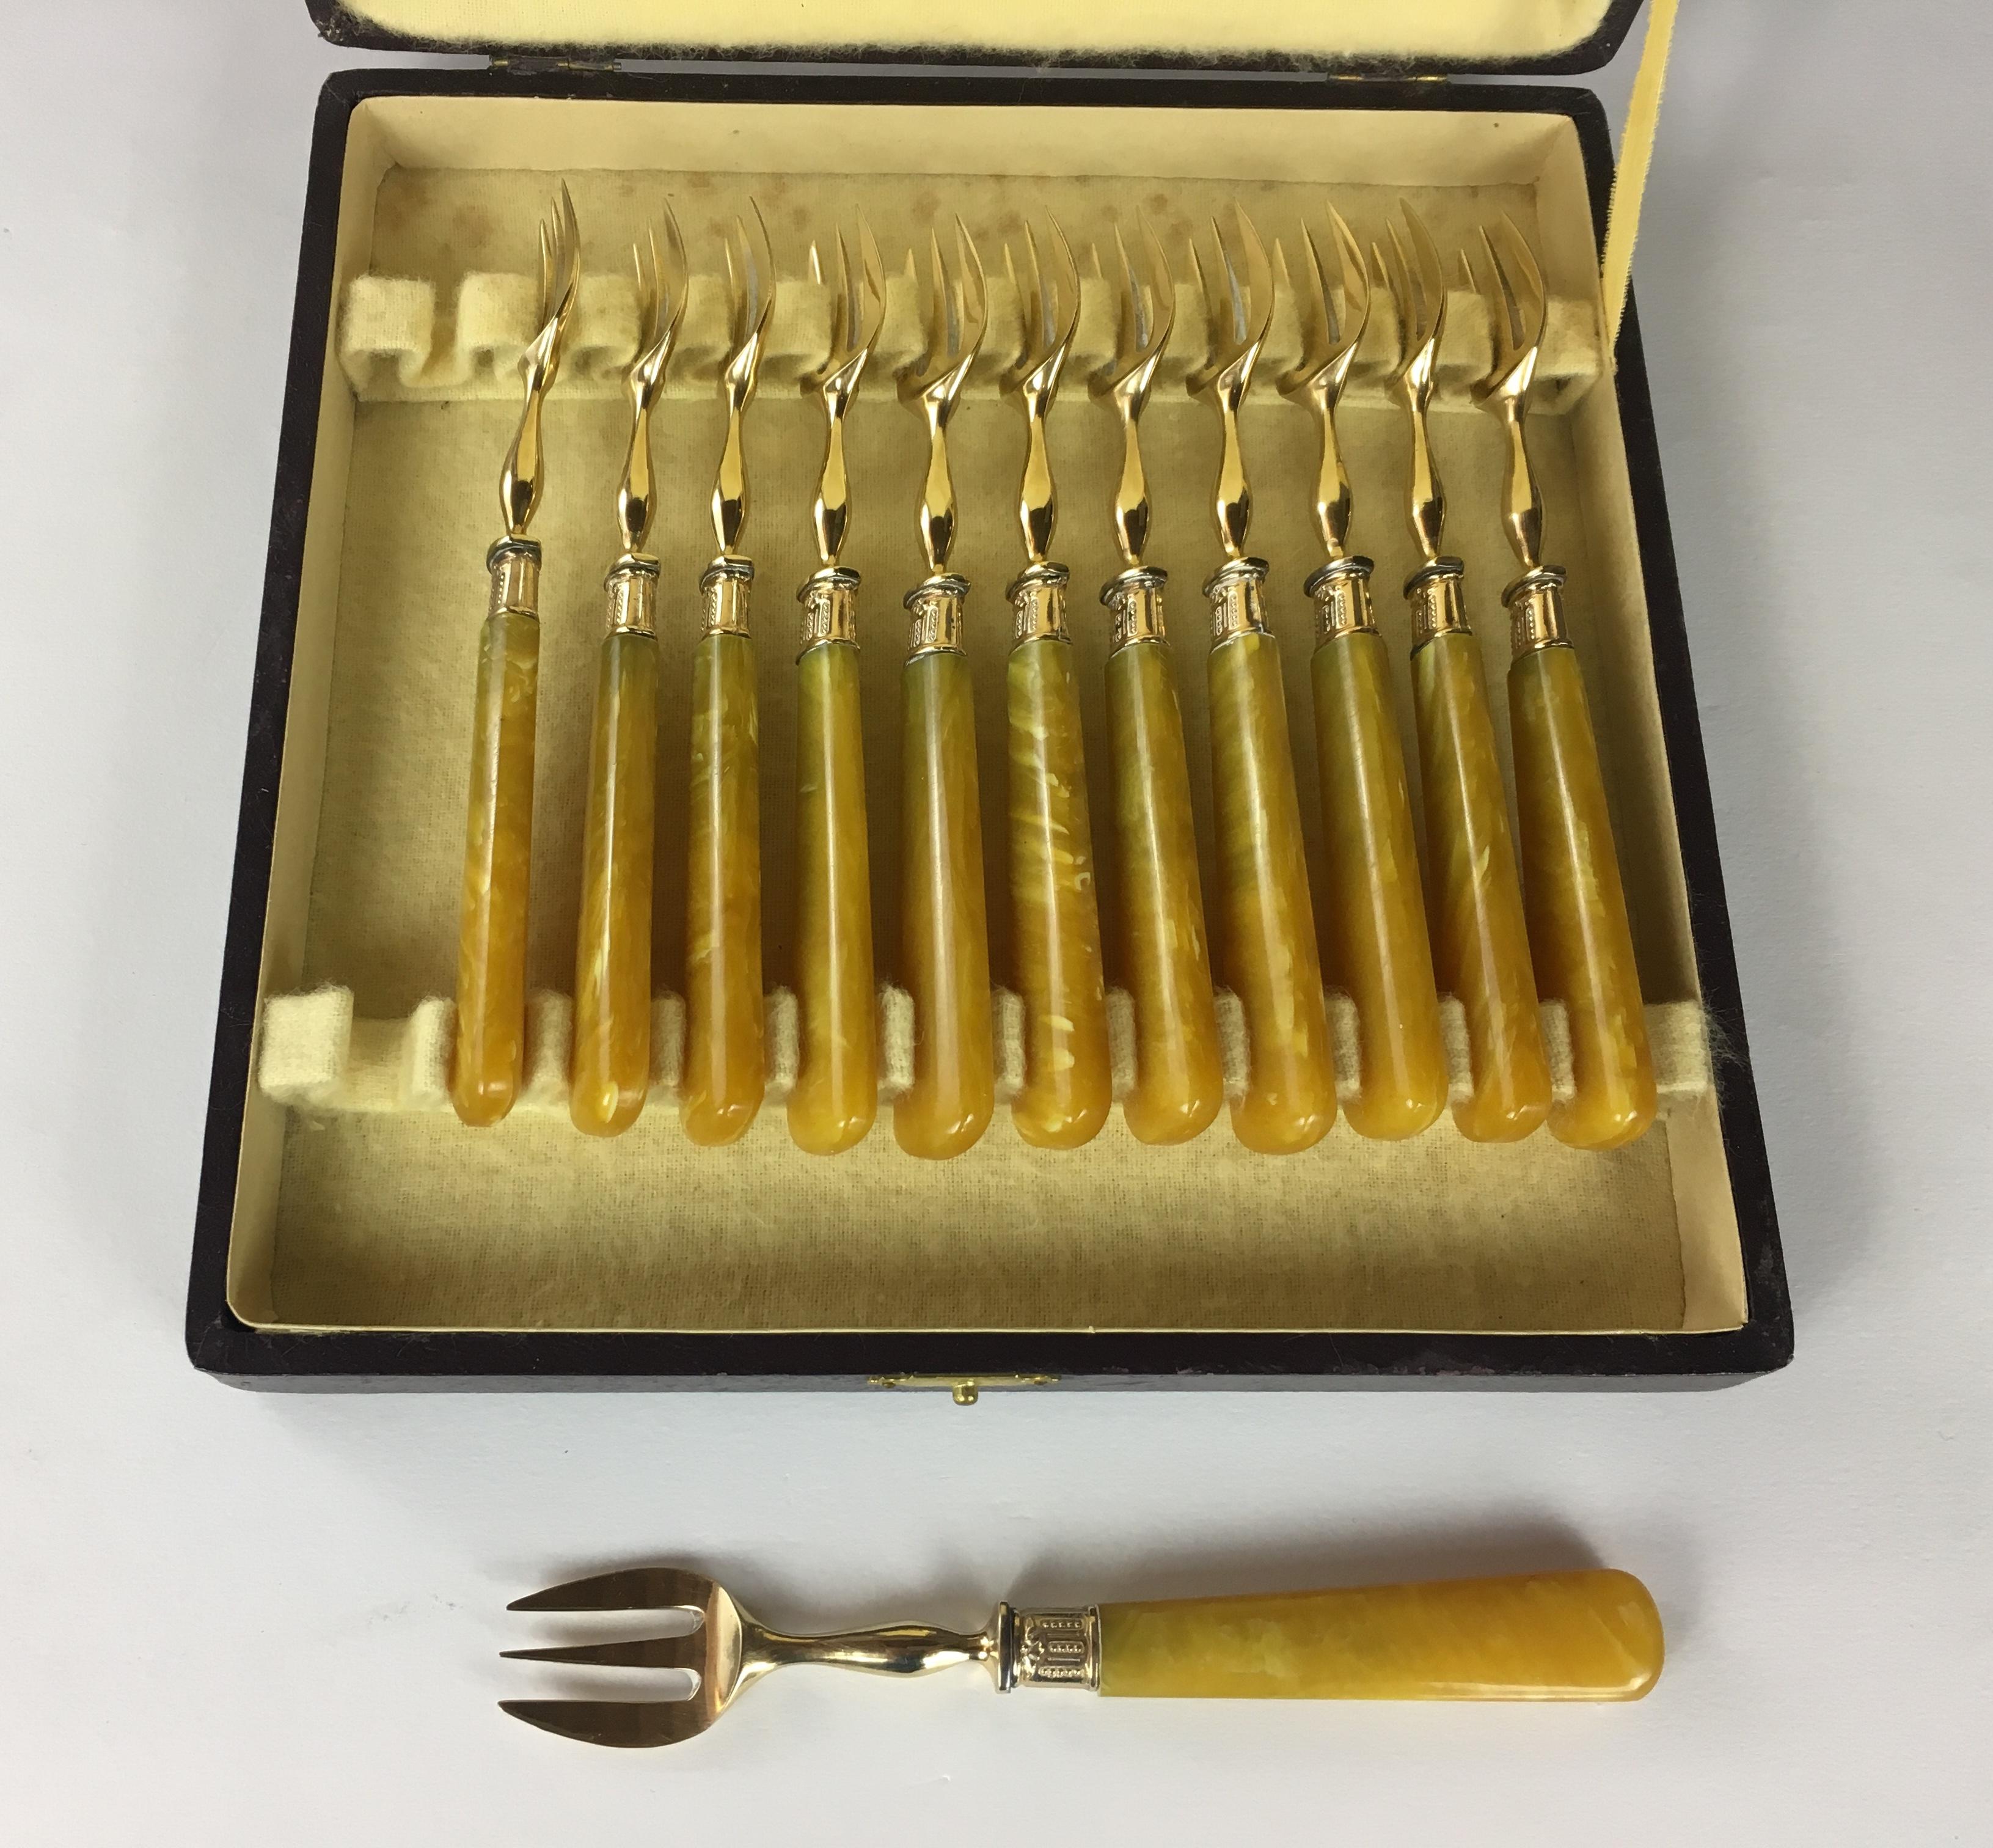 French Set of 36 Antique Mother-of-Pearl Handled Knives and Forks, Gold Ferrules